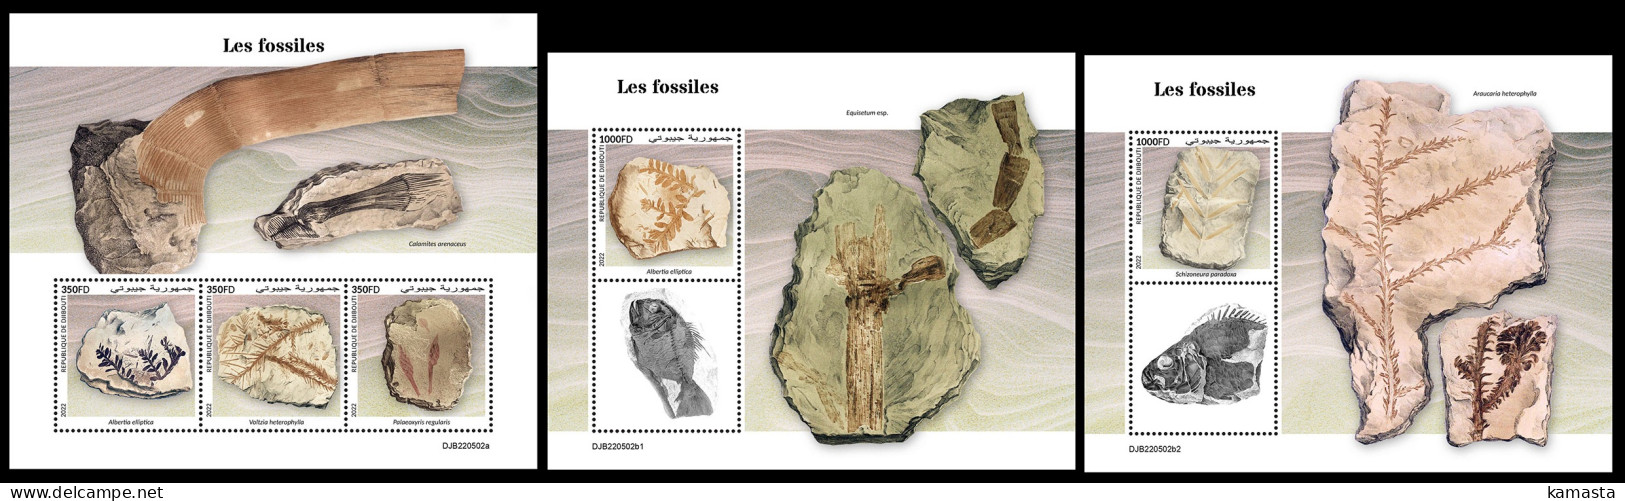 Djibouti  2022 Fossils. (502) OFFICIAL ISSUE - Fossiles